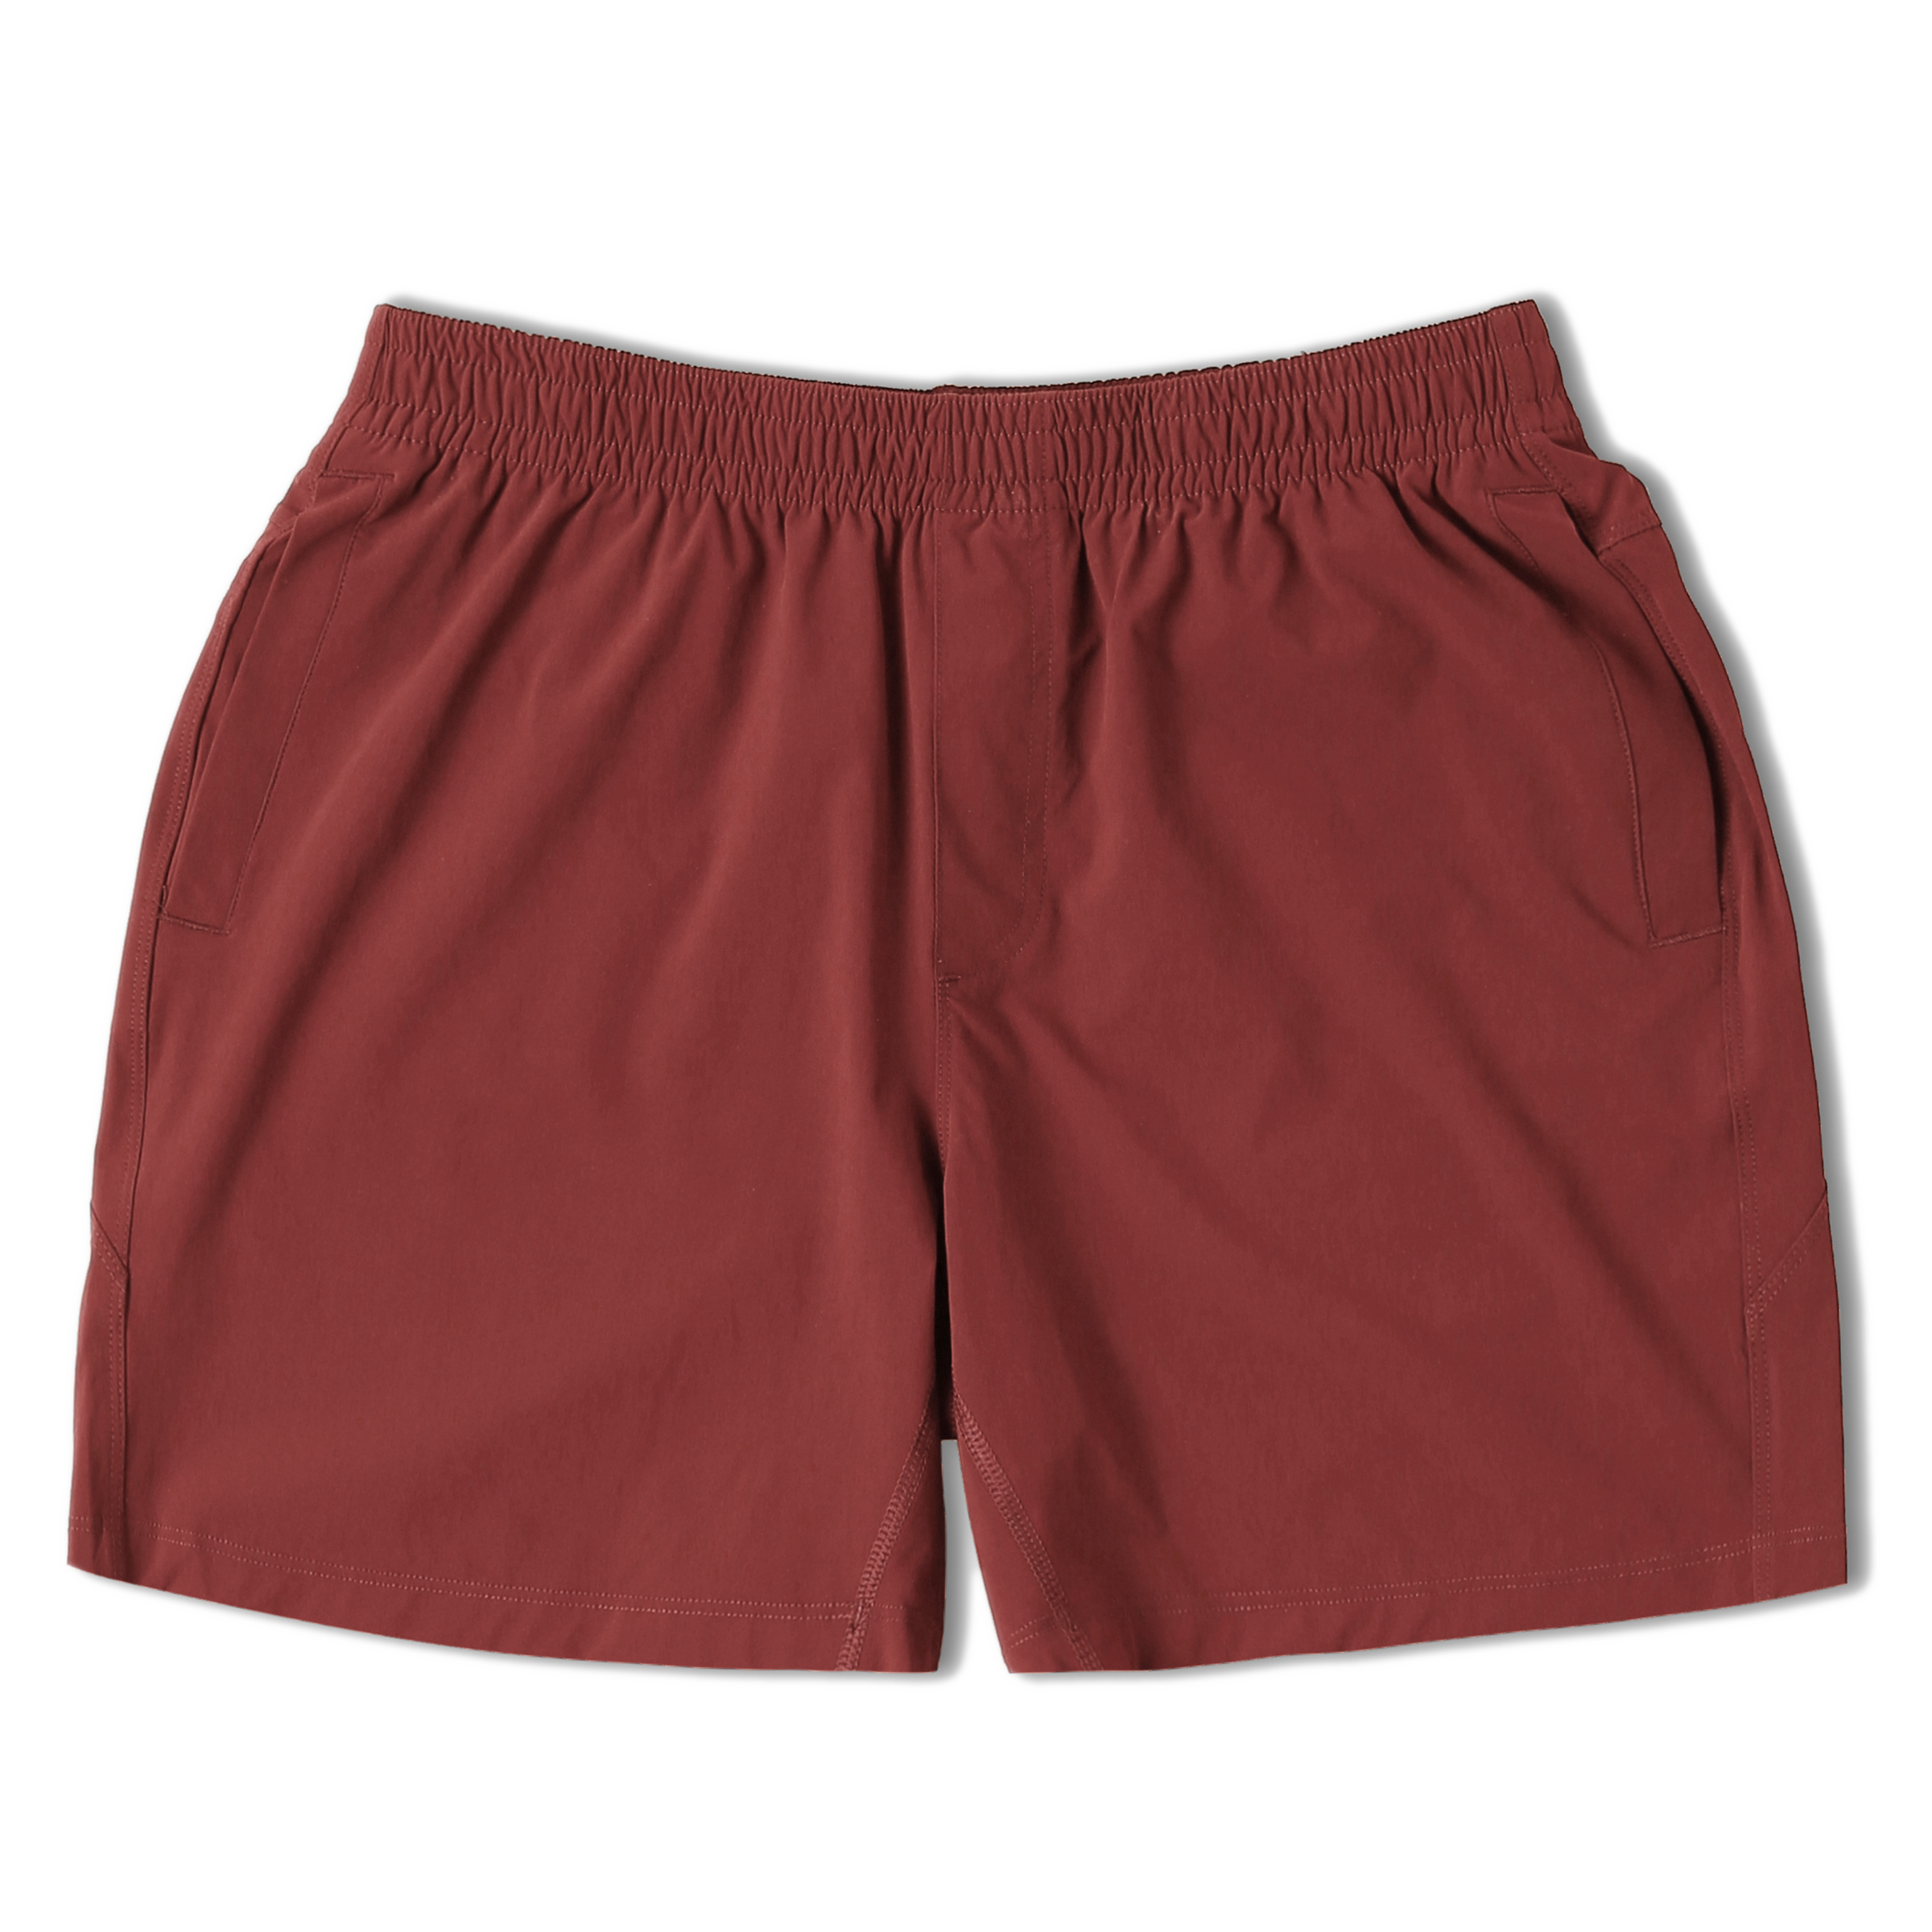 Atlas Short 5.5" Maroon Front with elastic waistband and two inseam pockets